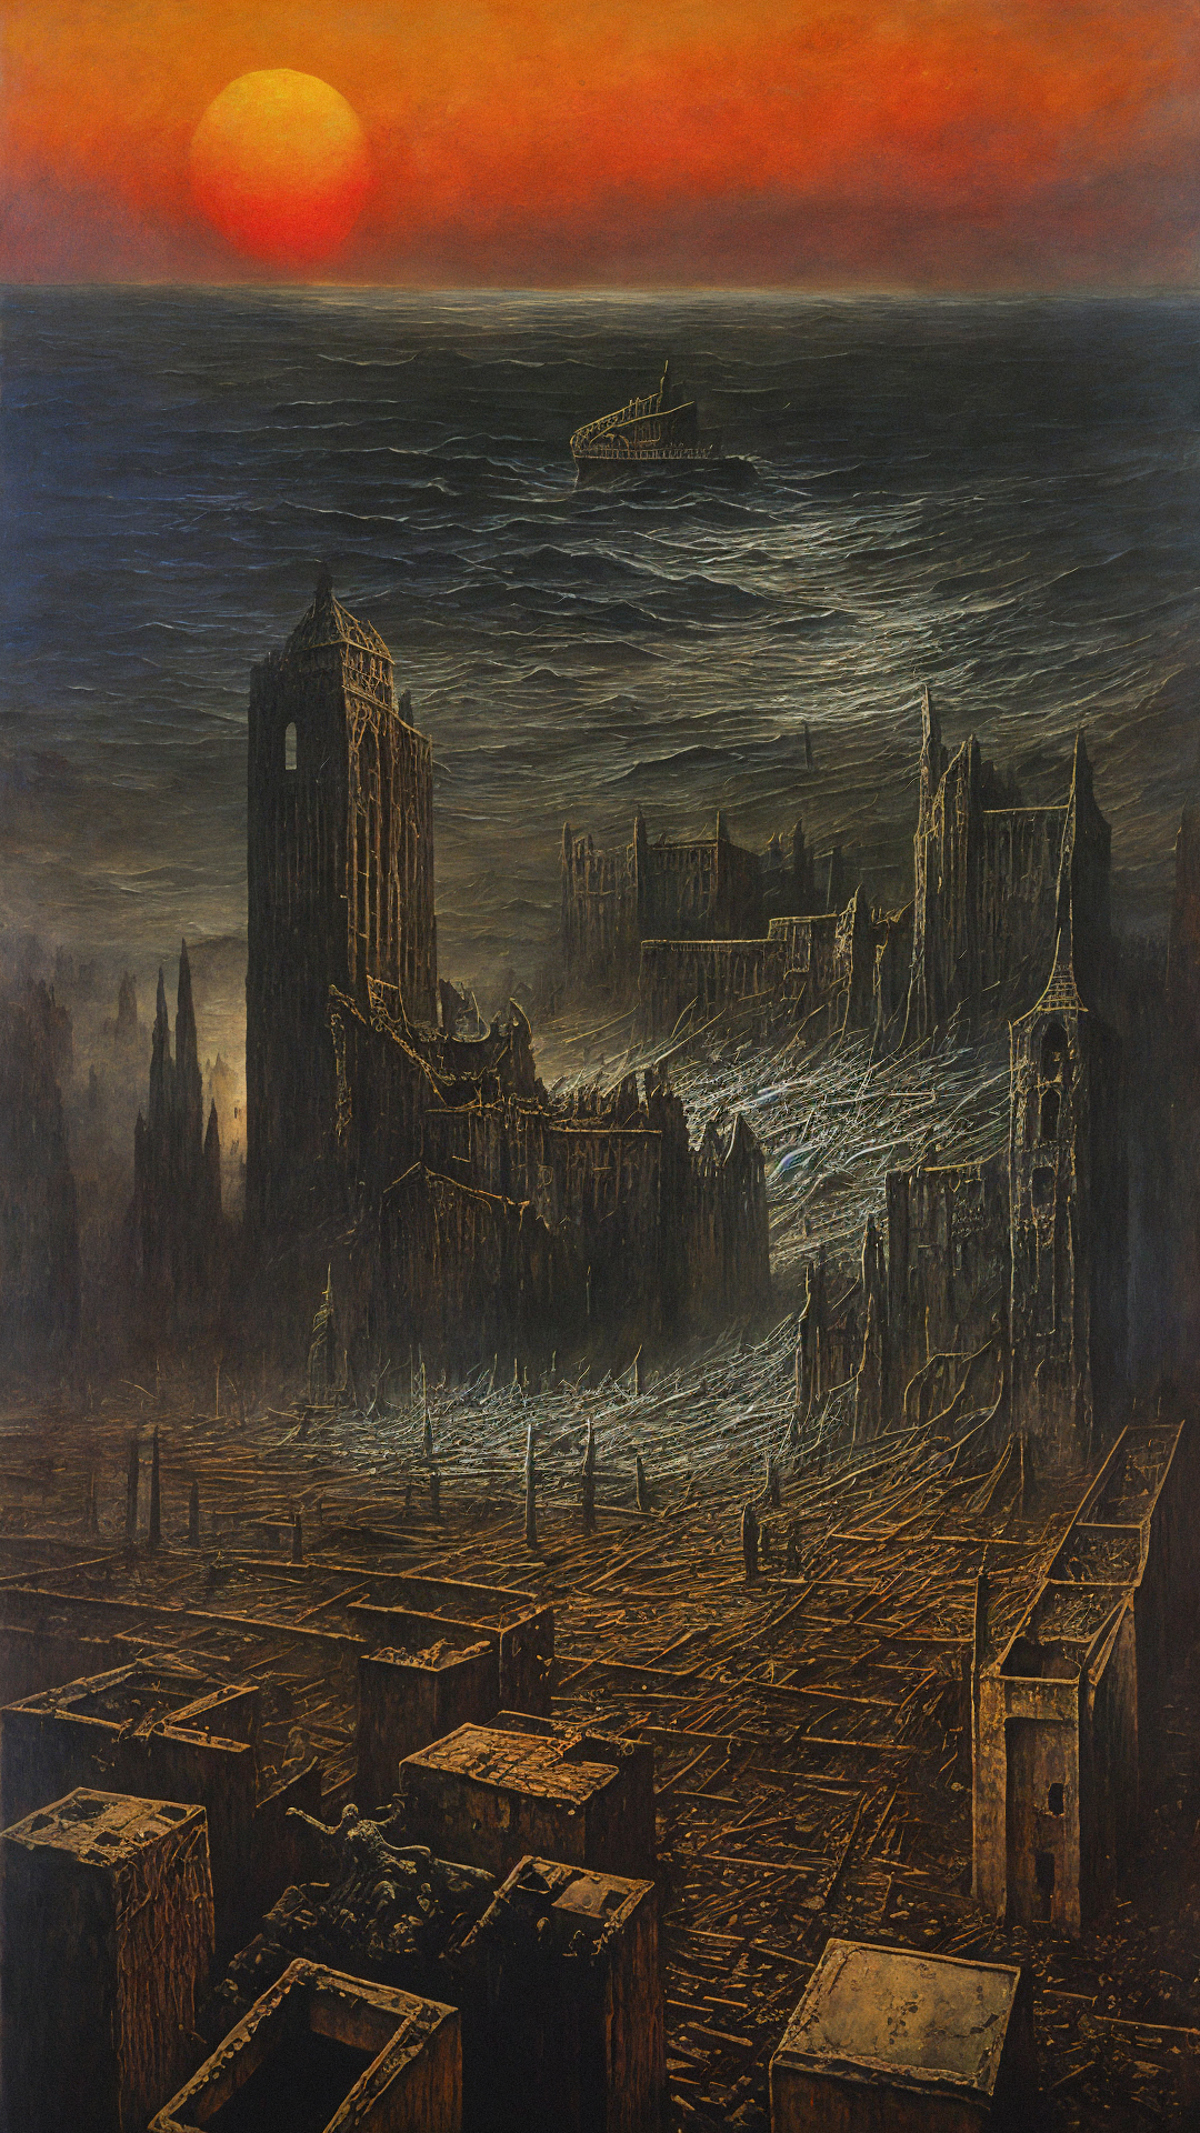 Dark and ominous painting of a castle and its surrounding area, with a black sky overhead.